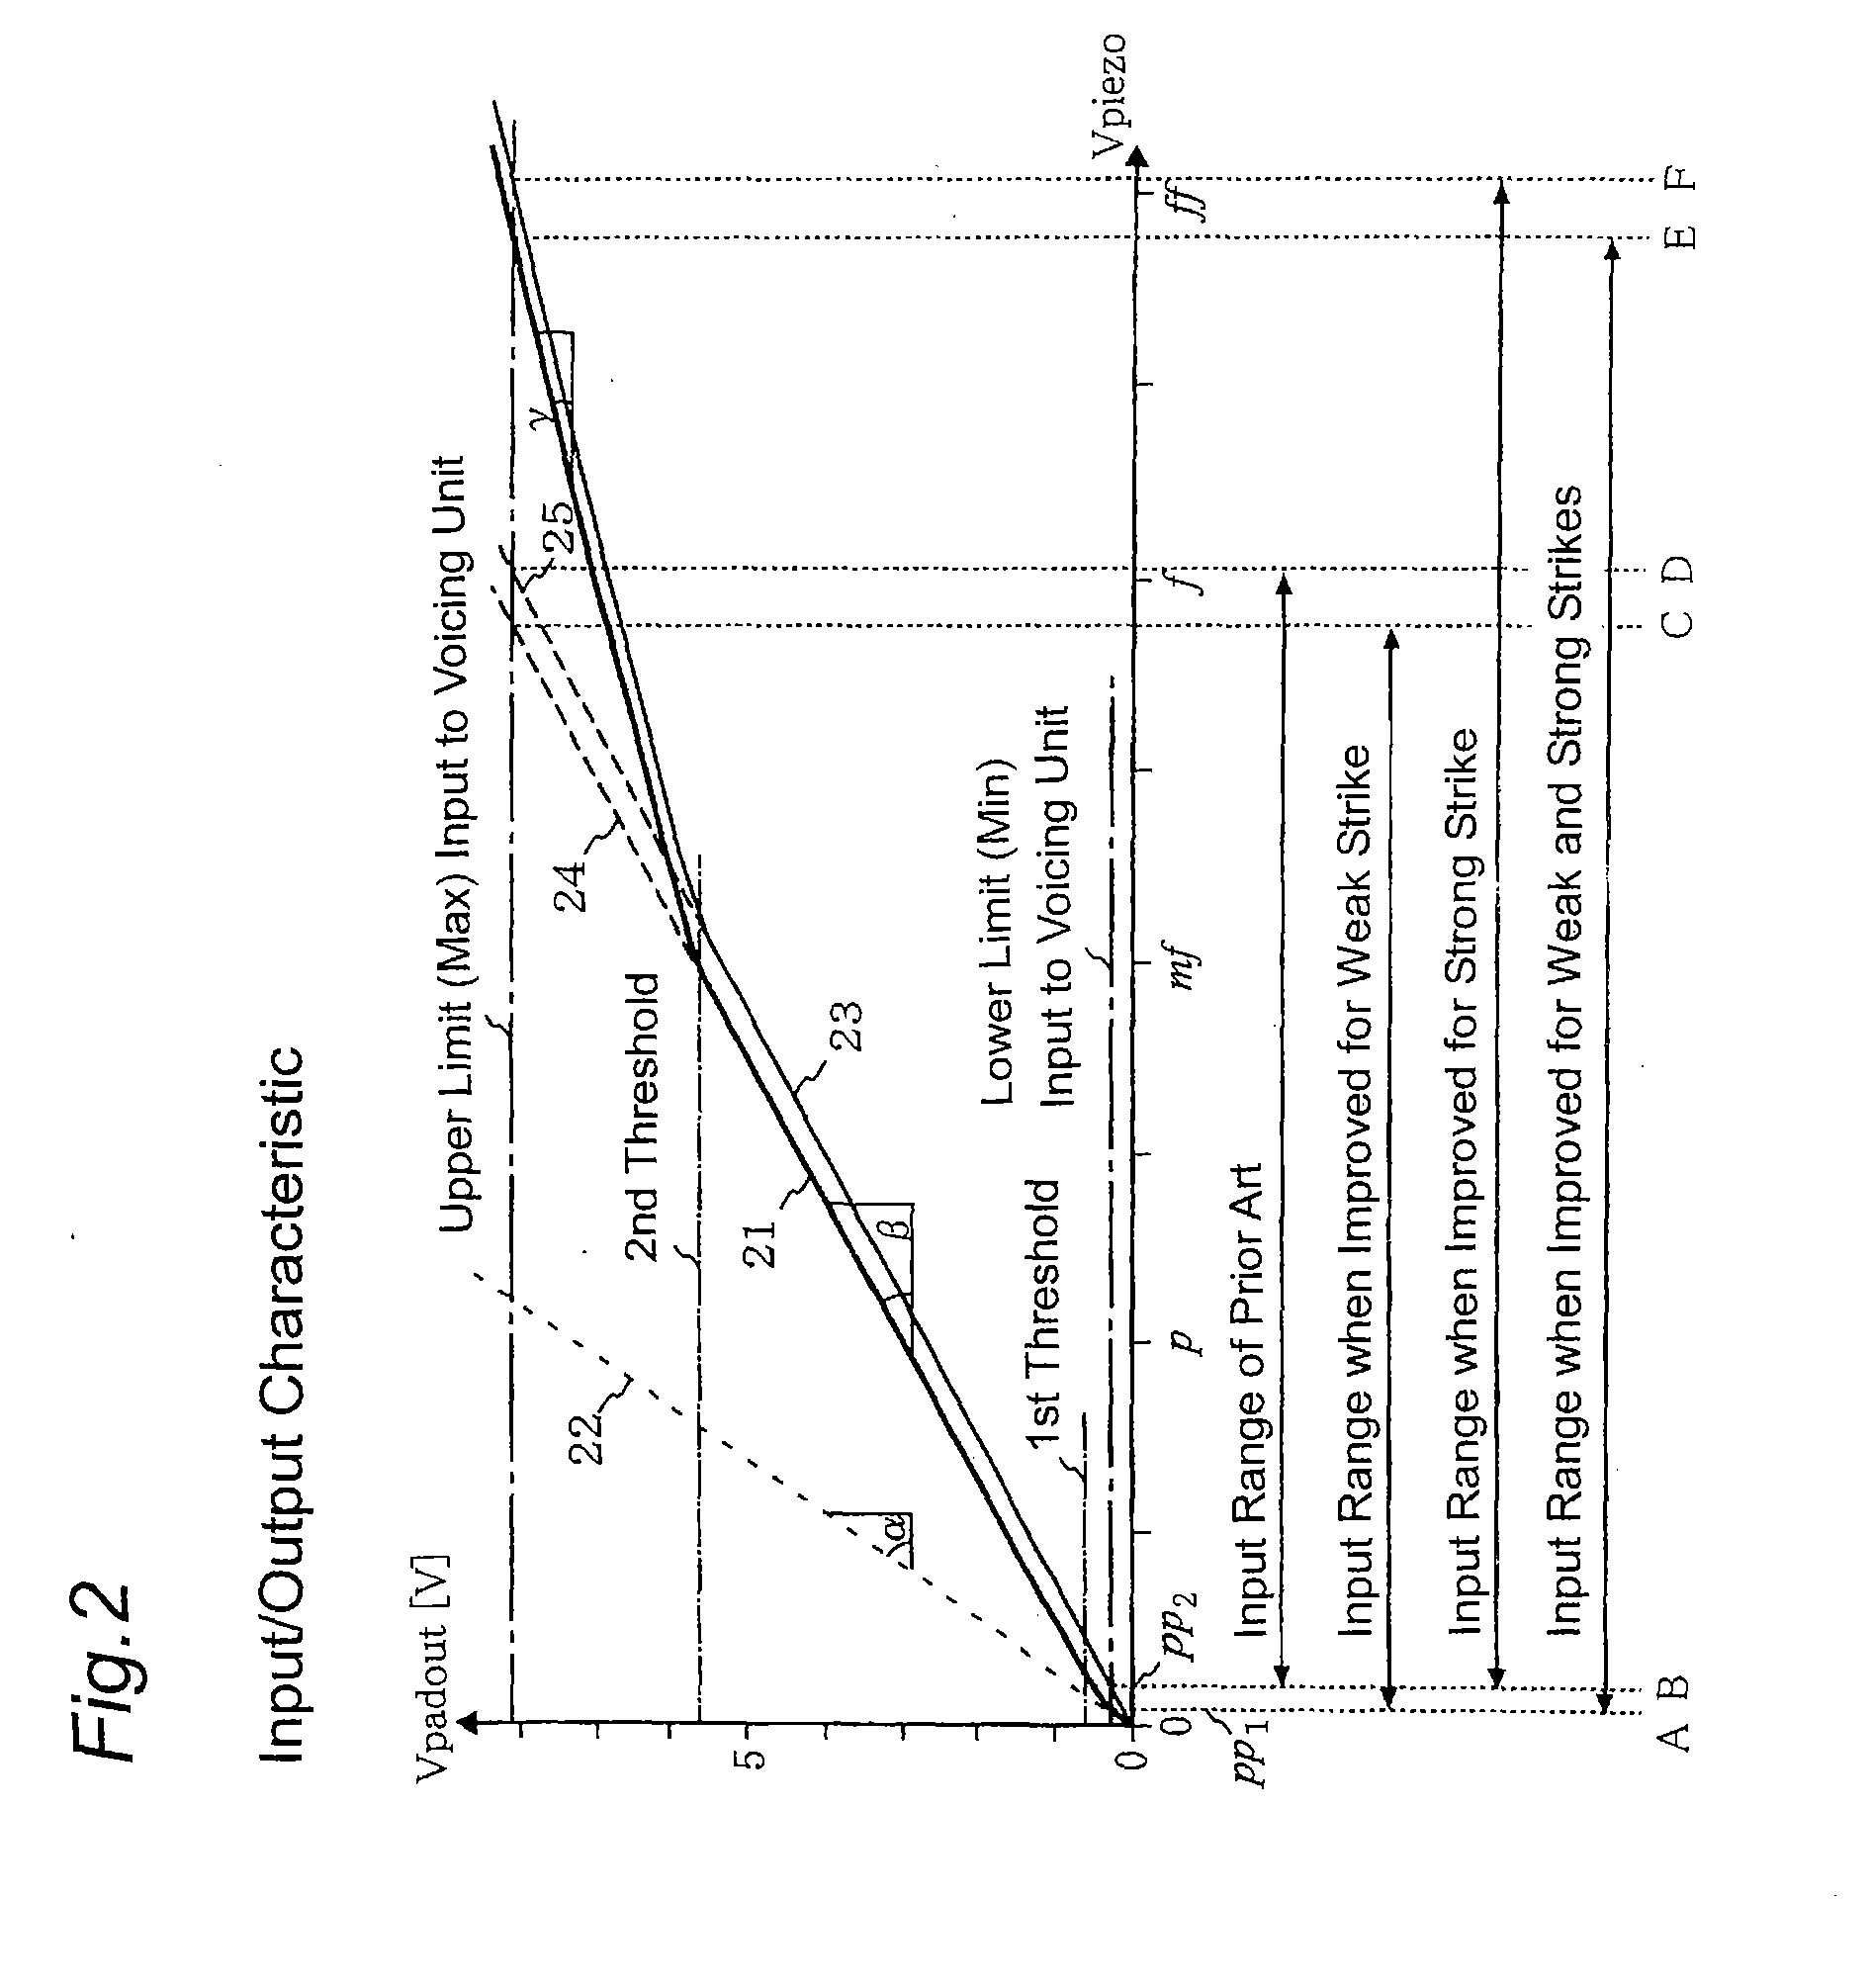 Strike Input Device for Electronic Percussion Instrument